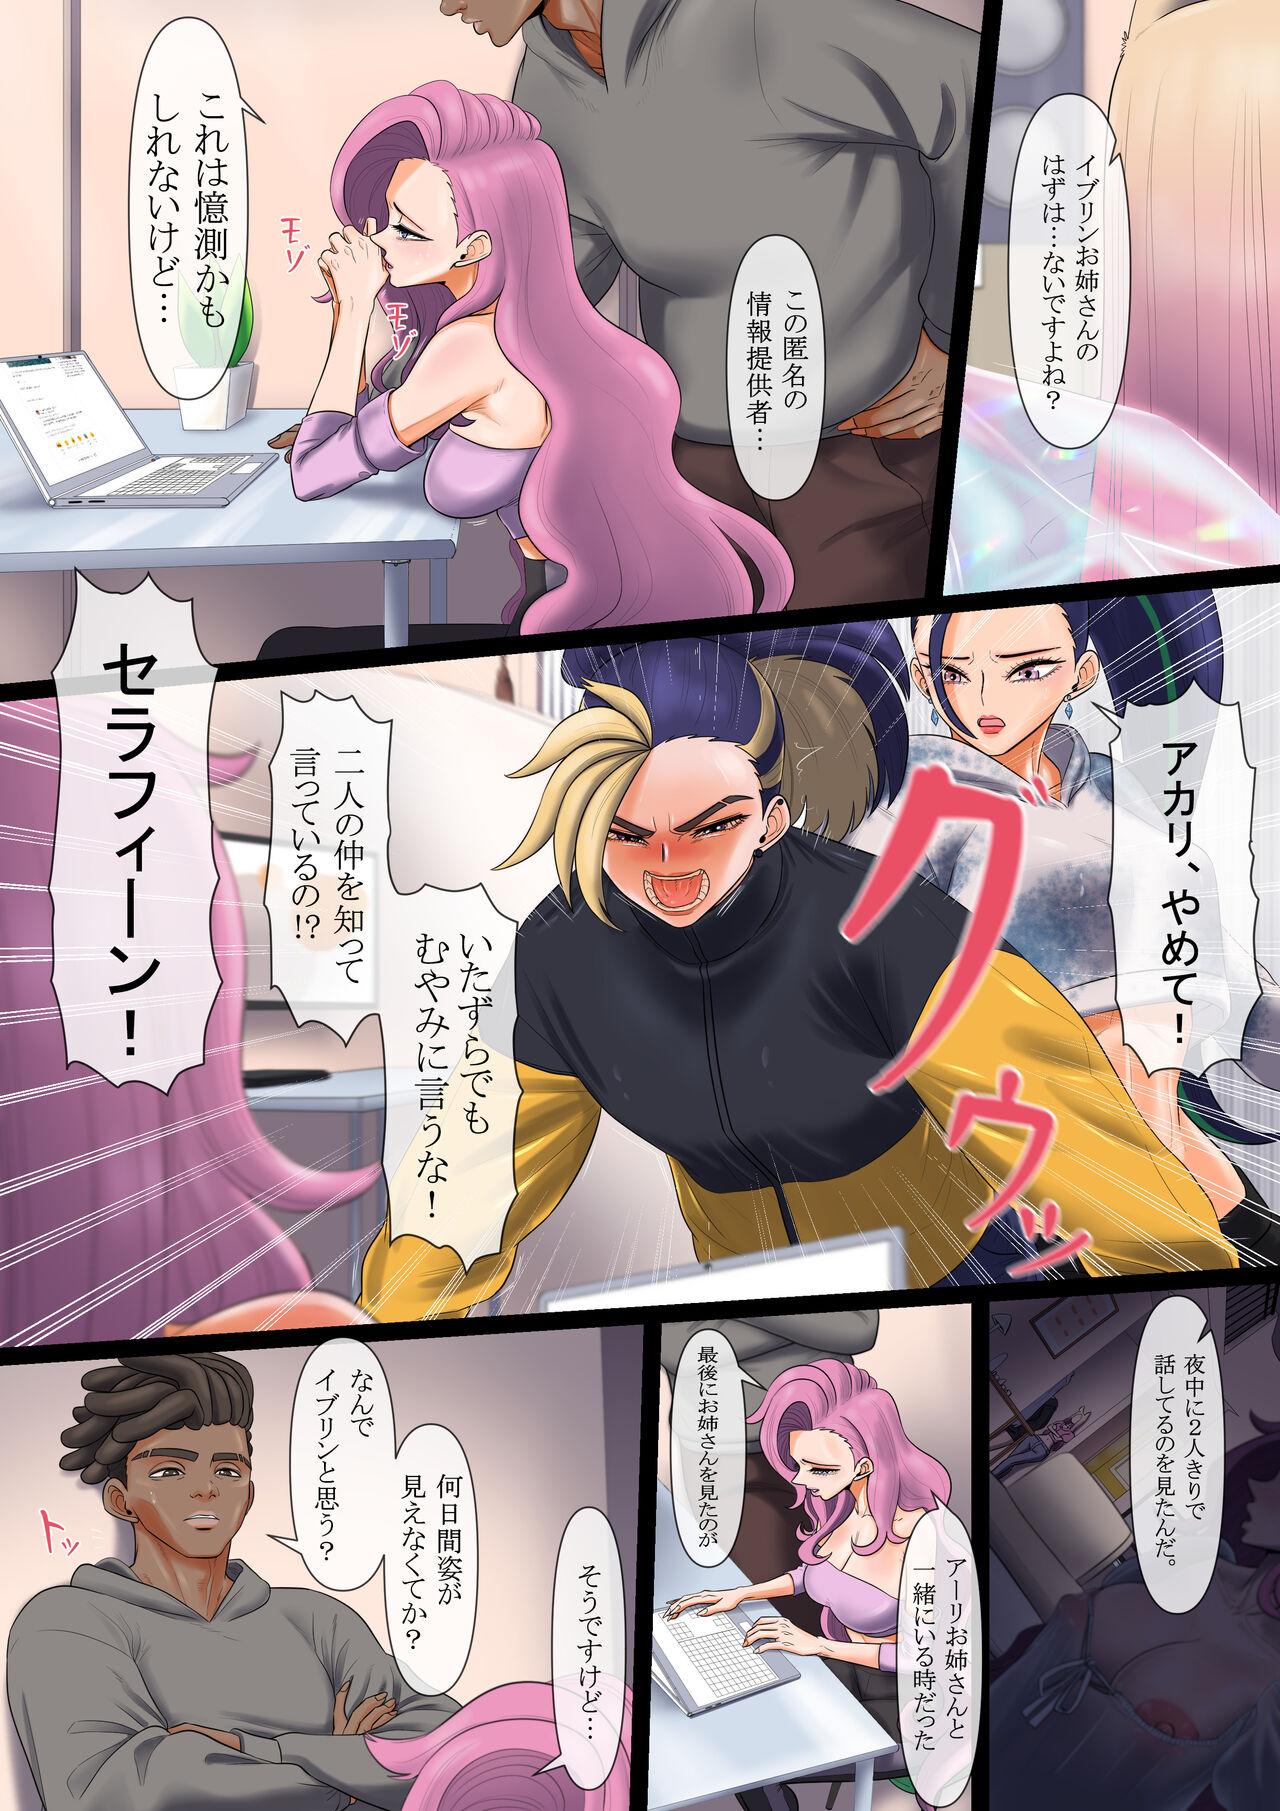 Pussy Fuck 守りたいもの... - League of legends Free Hardcore Porn - Page 3